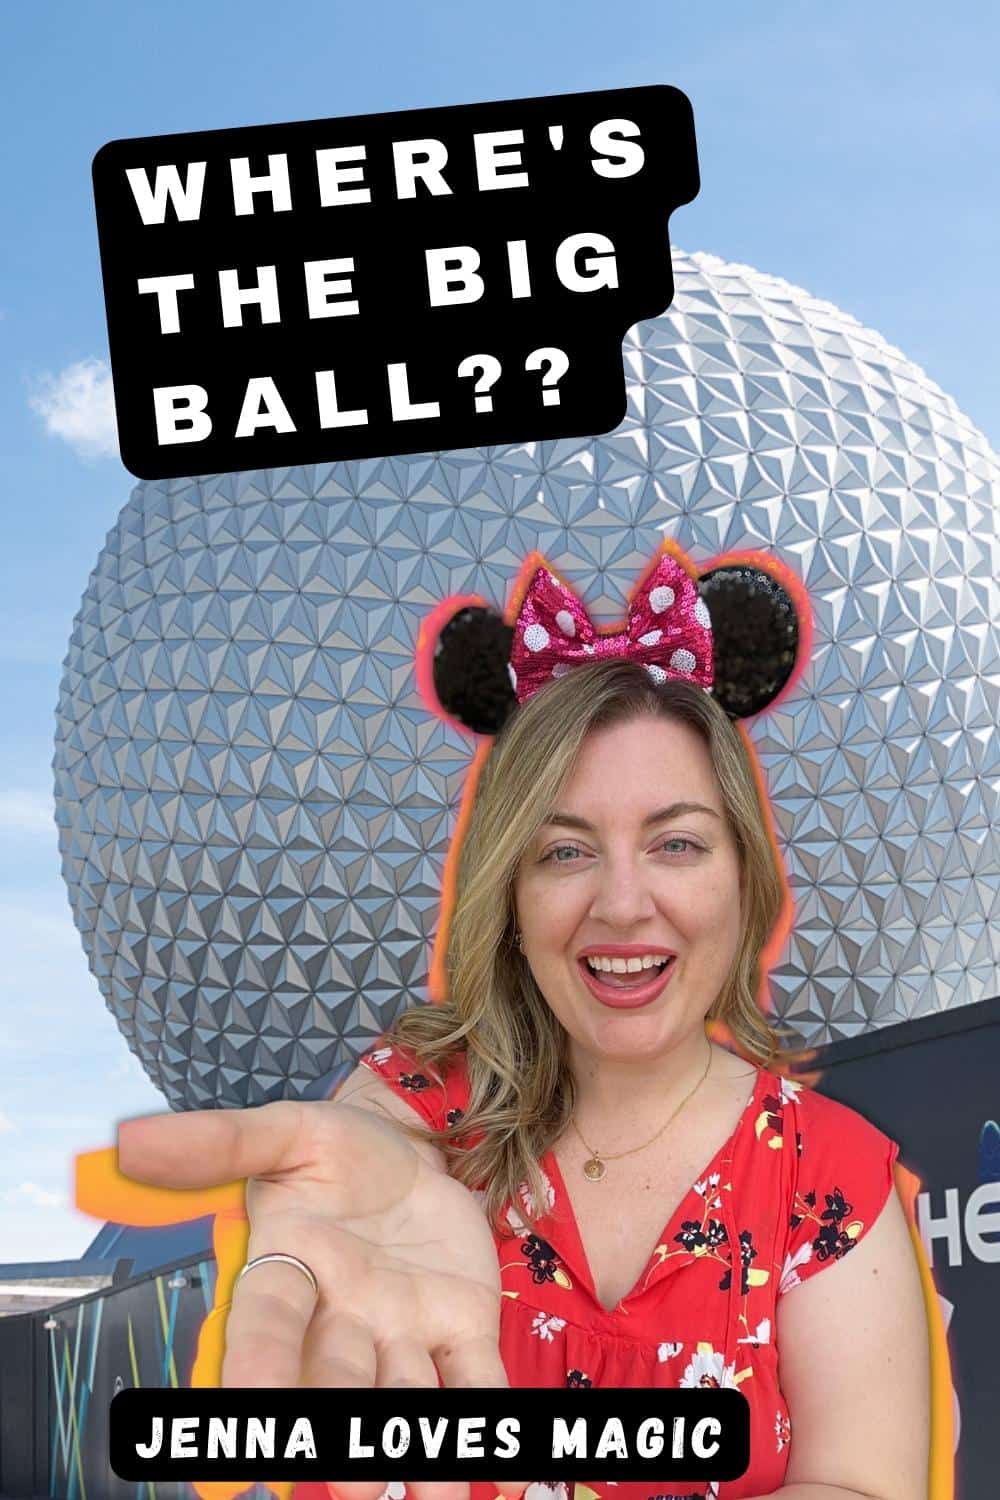 Epcot ball location at Disney World with text overlay and woman wearing mickey ears